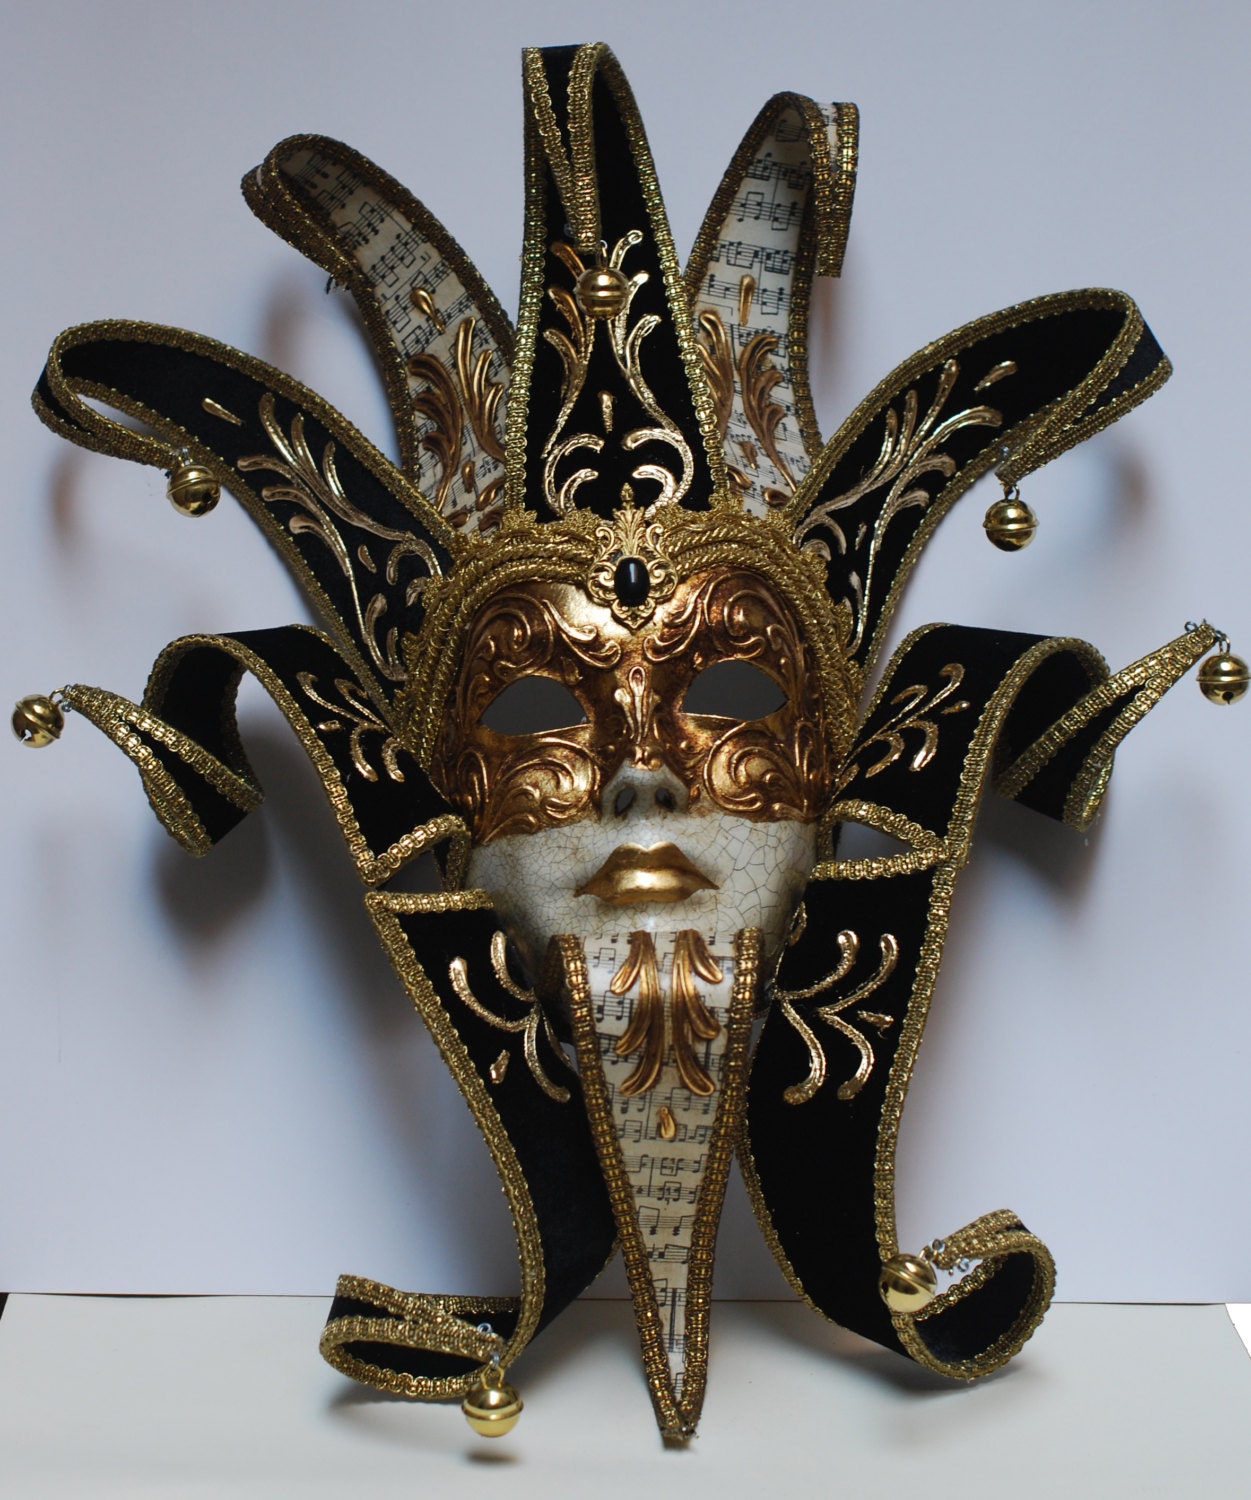 Joker Mask Jester Masquerade Mask Full Face Venetian Mask Gold and  Green/gold and Blue Home Decor, Interior Design Mask F27/F28 